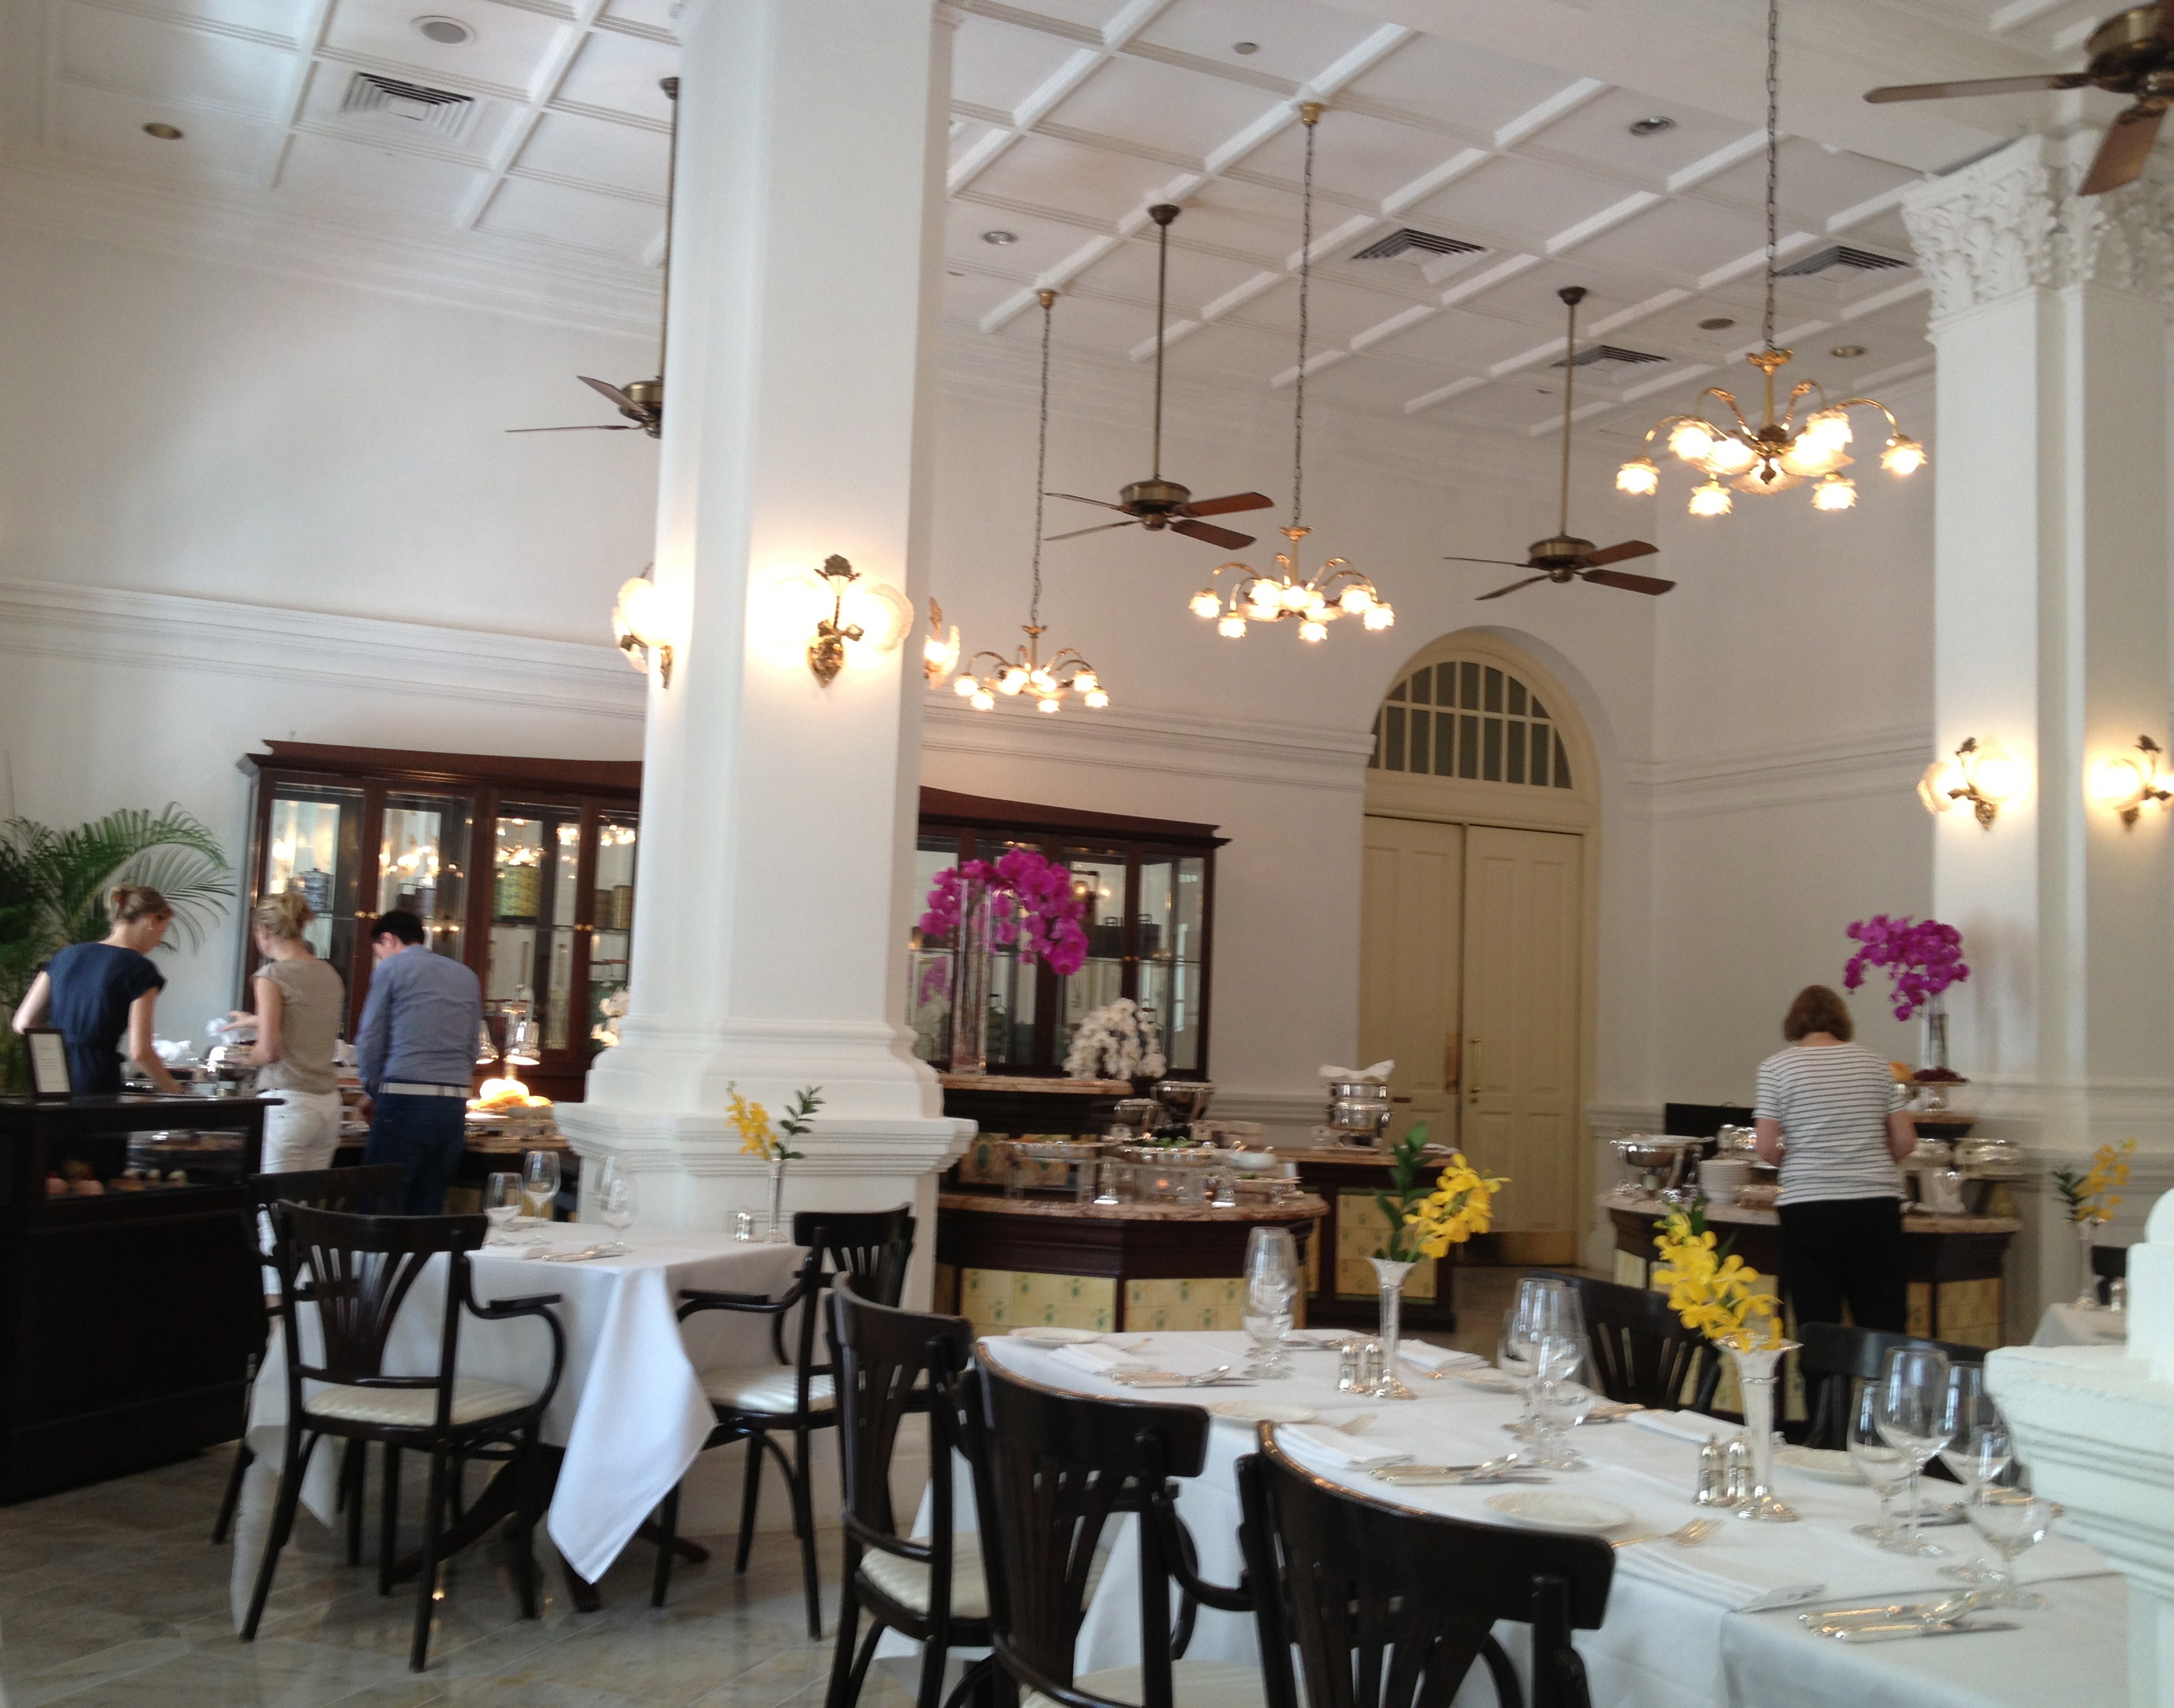 The fresh colonial interior at Tiffin Room